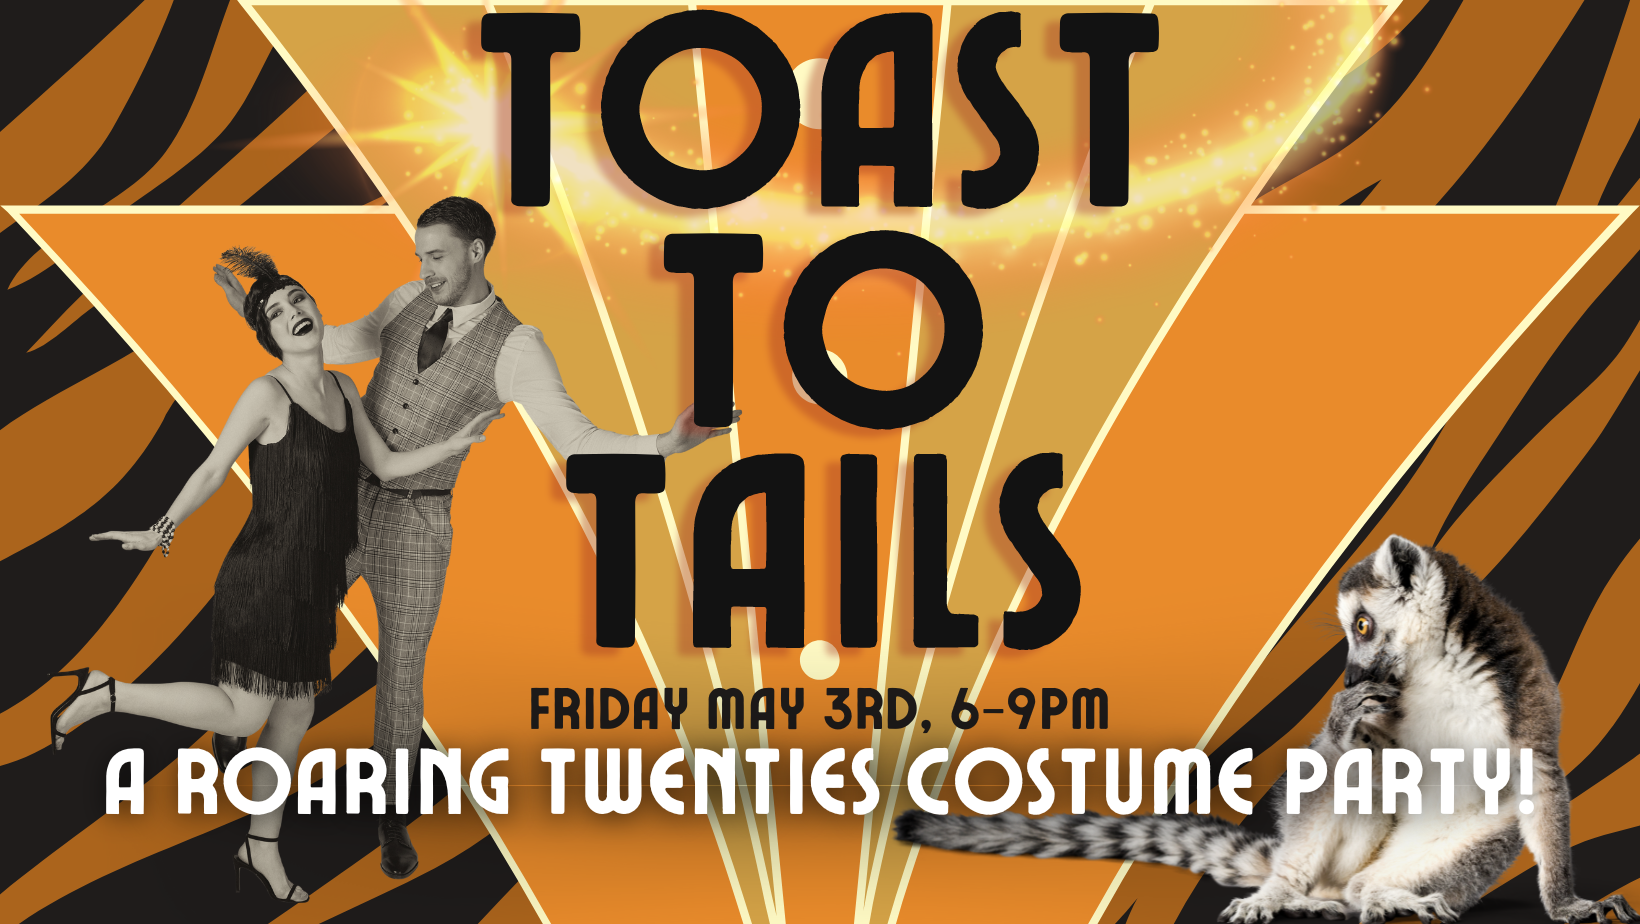 toast to tails event flyer